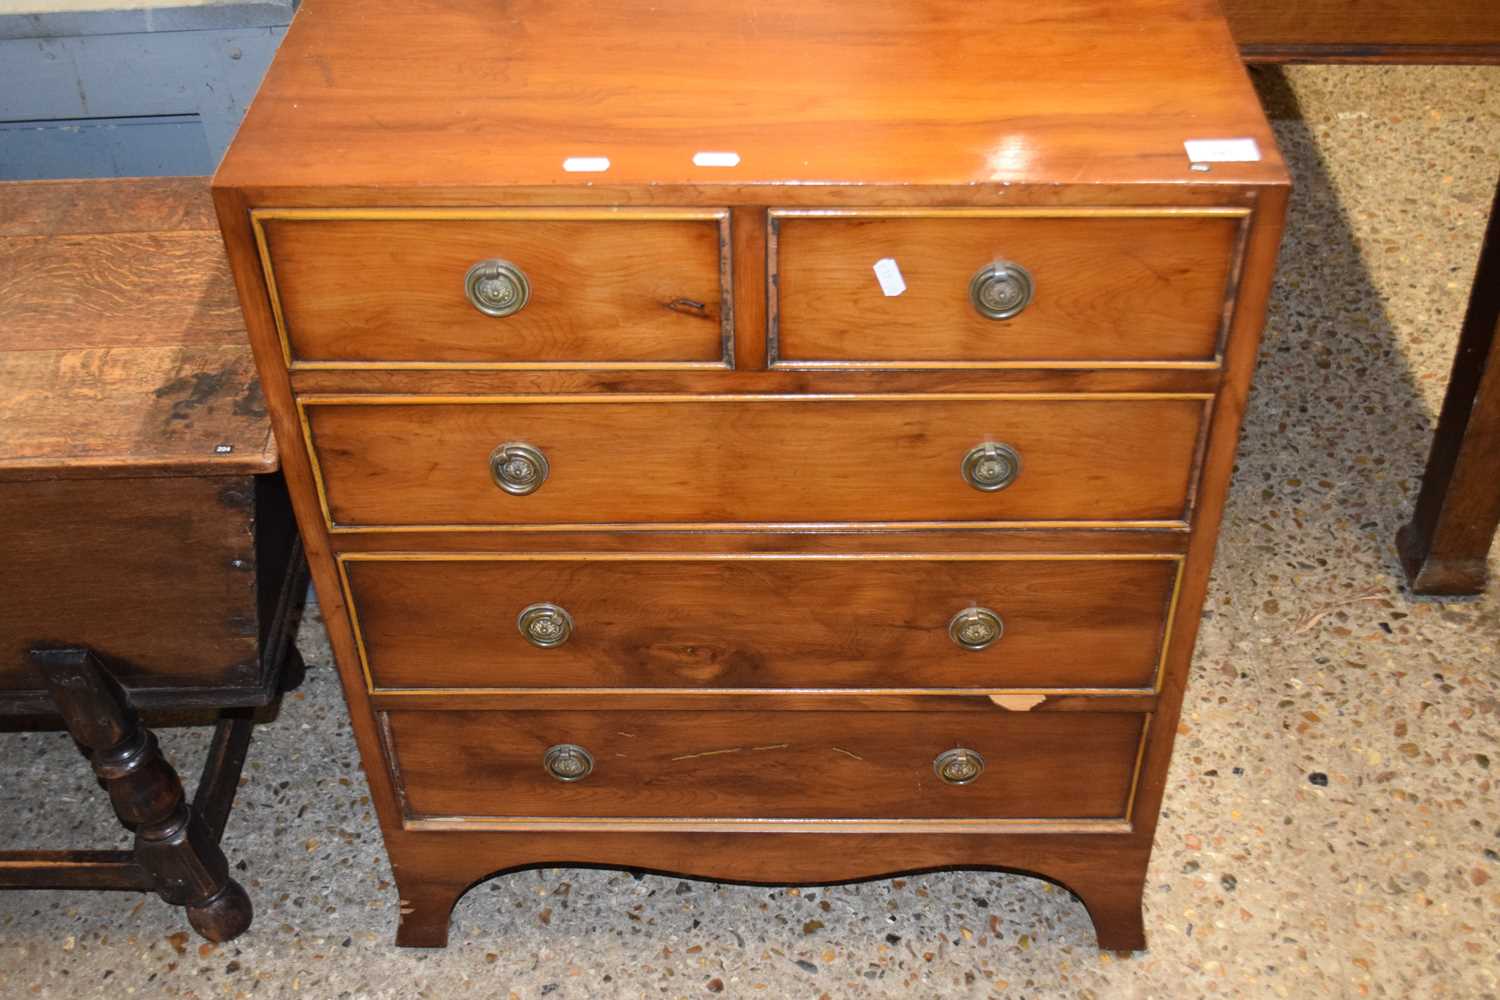 Reproduction yew wood veneered five drawer chest with ringlet handles, 61cm wide